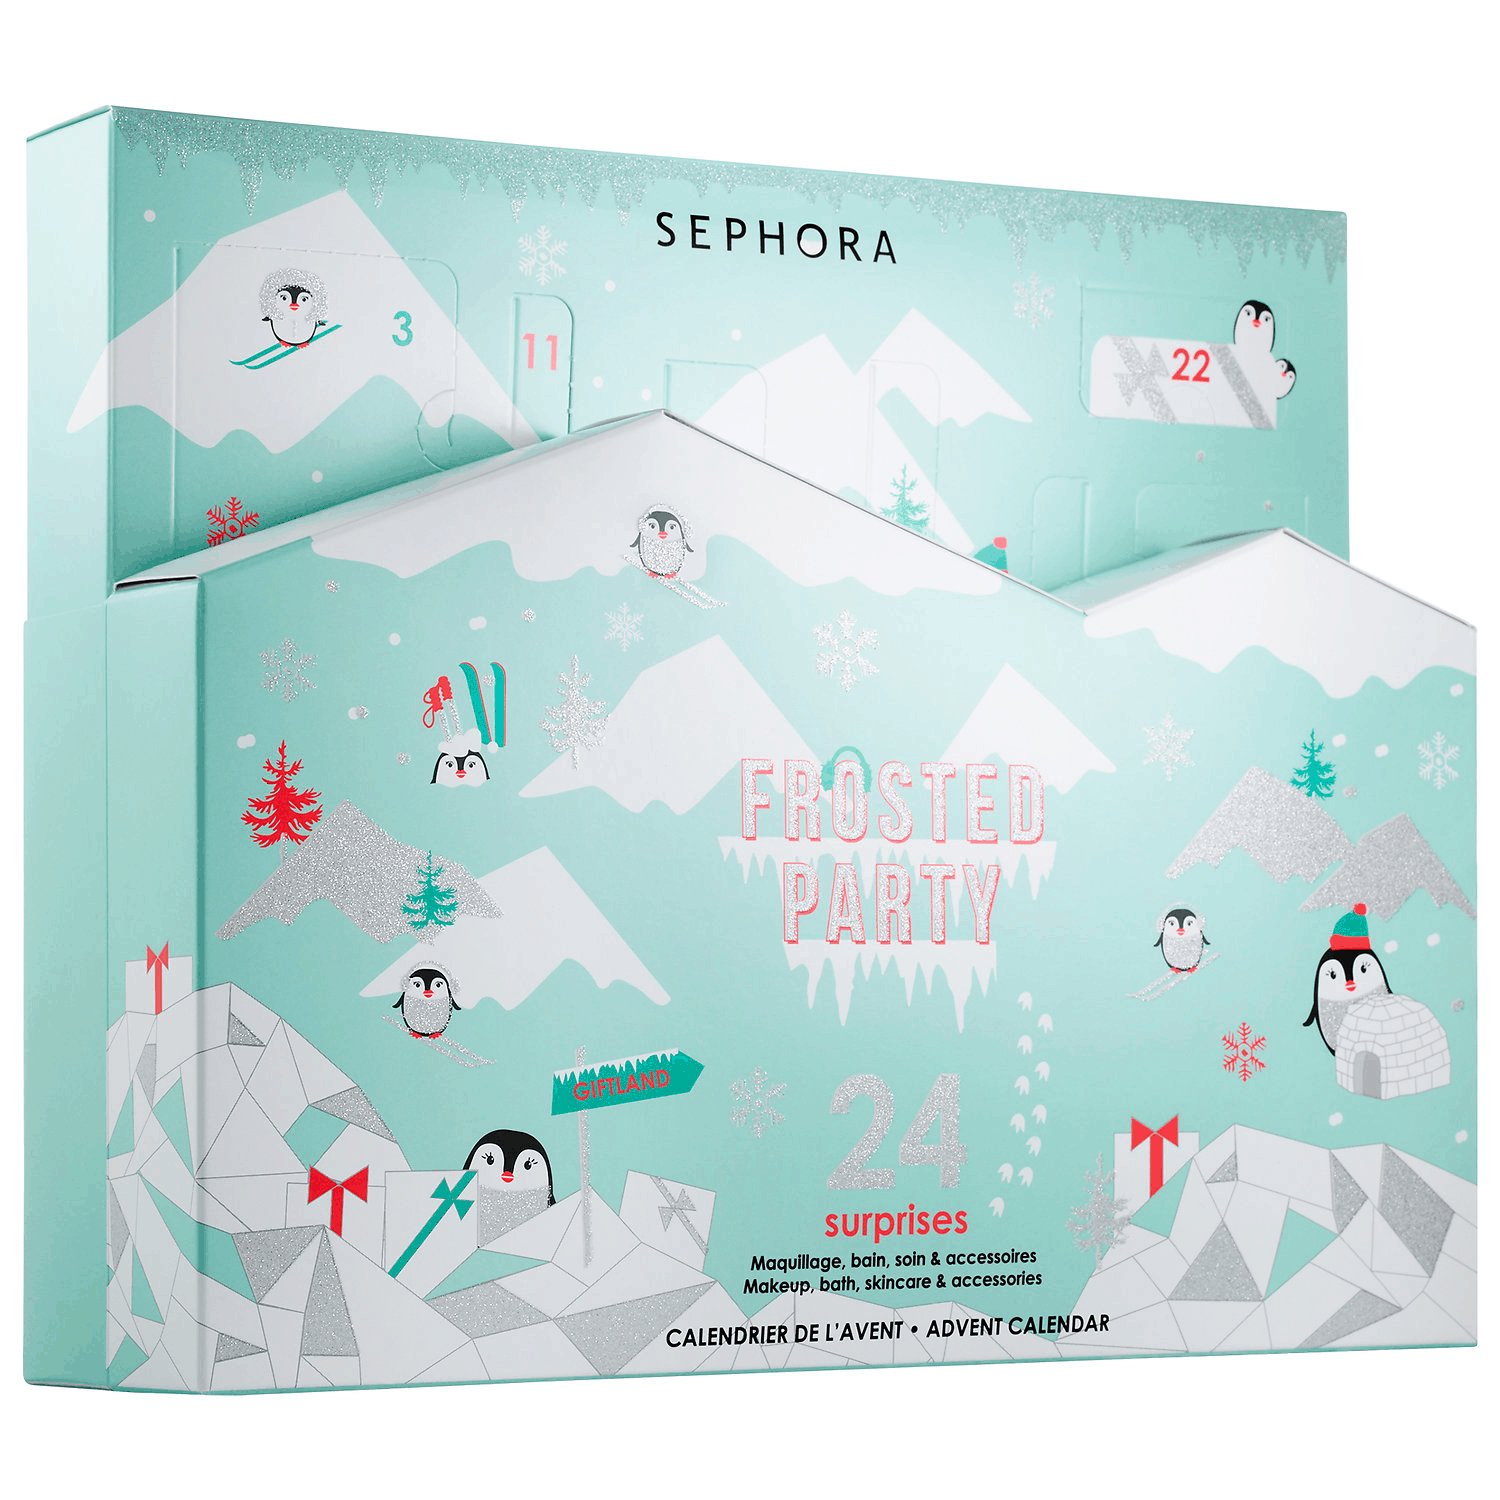 2019 Sephora Advent Calendar Available Now + Coupons.